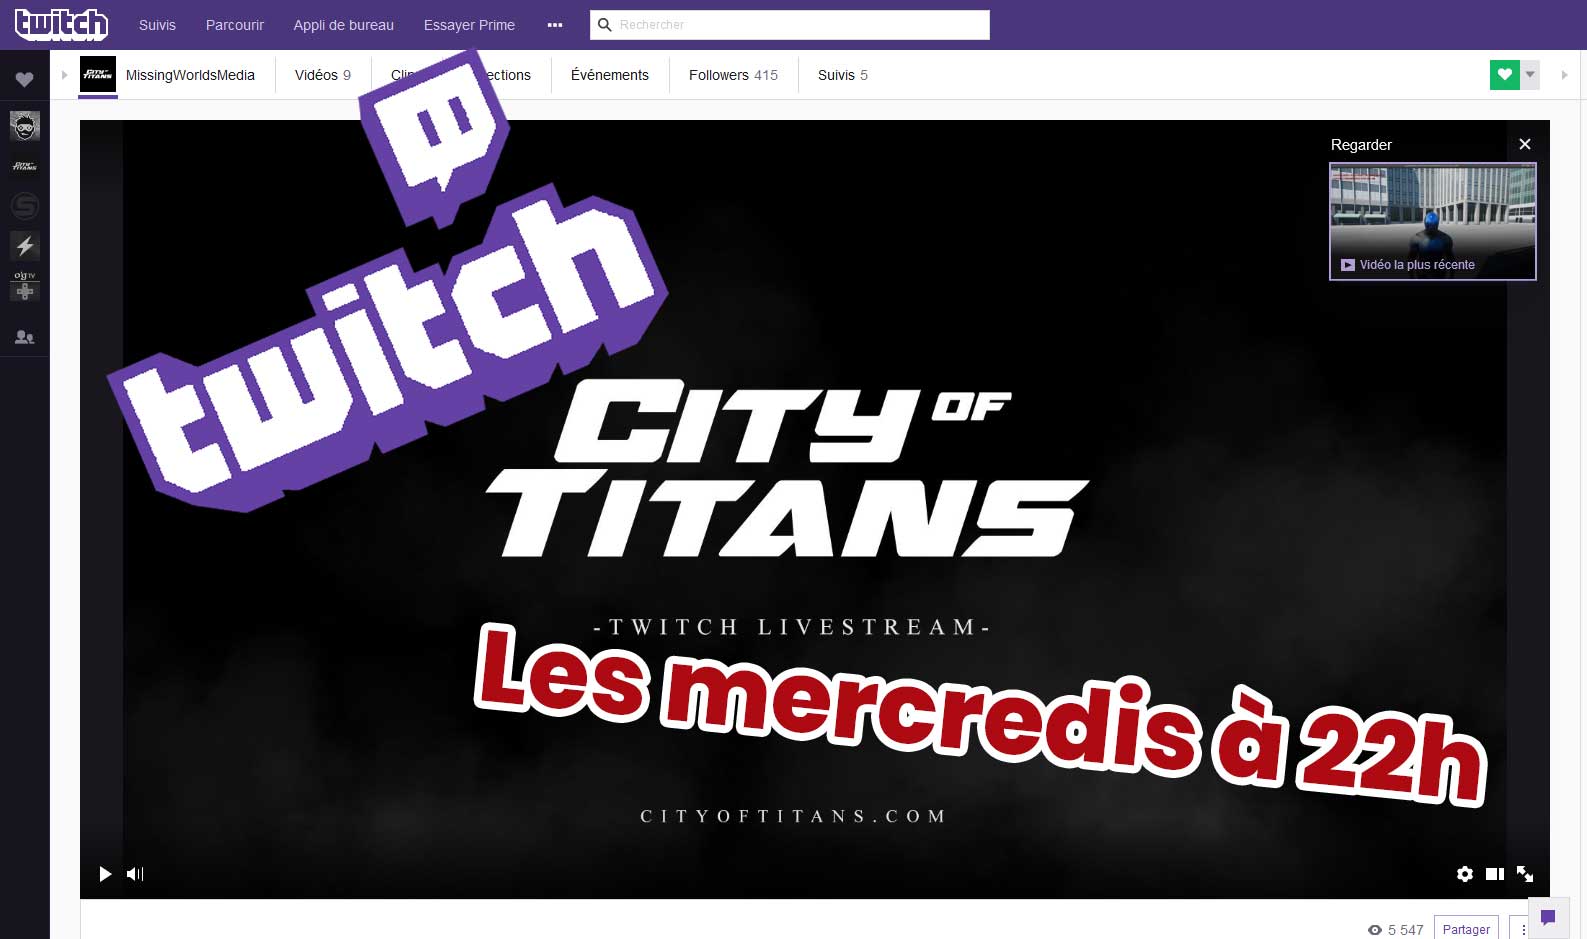 news-twitch-city-of-titans